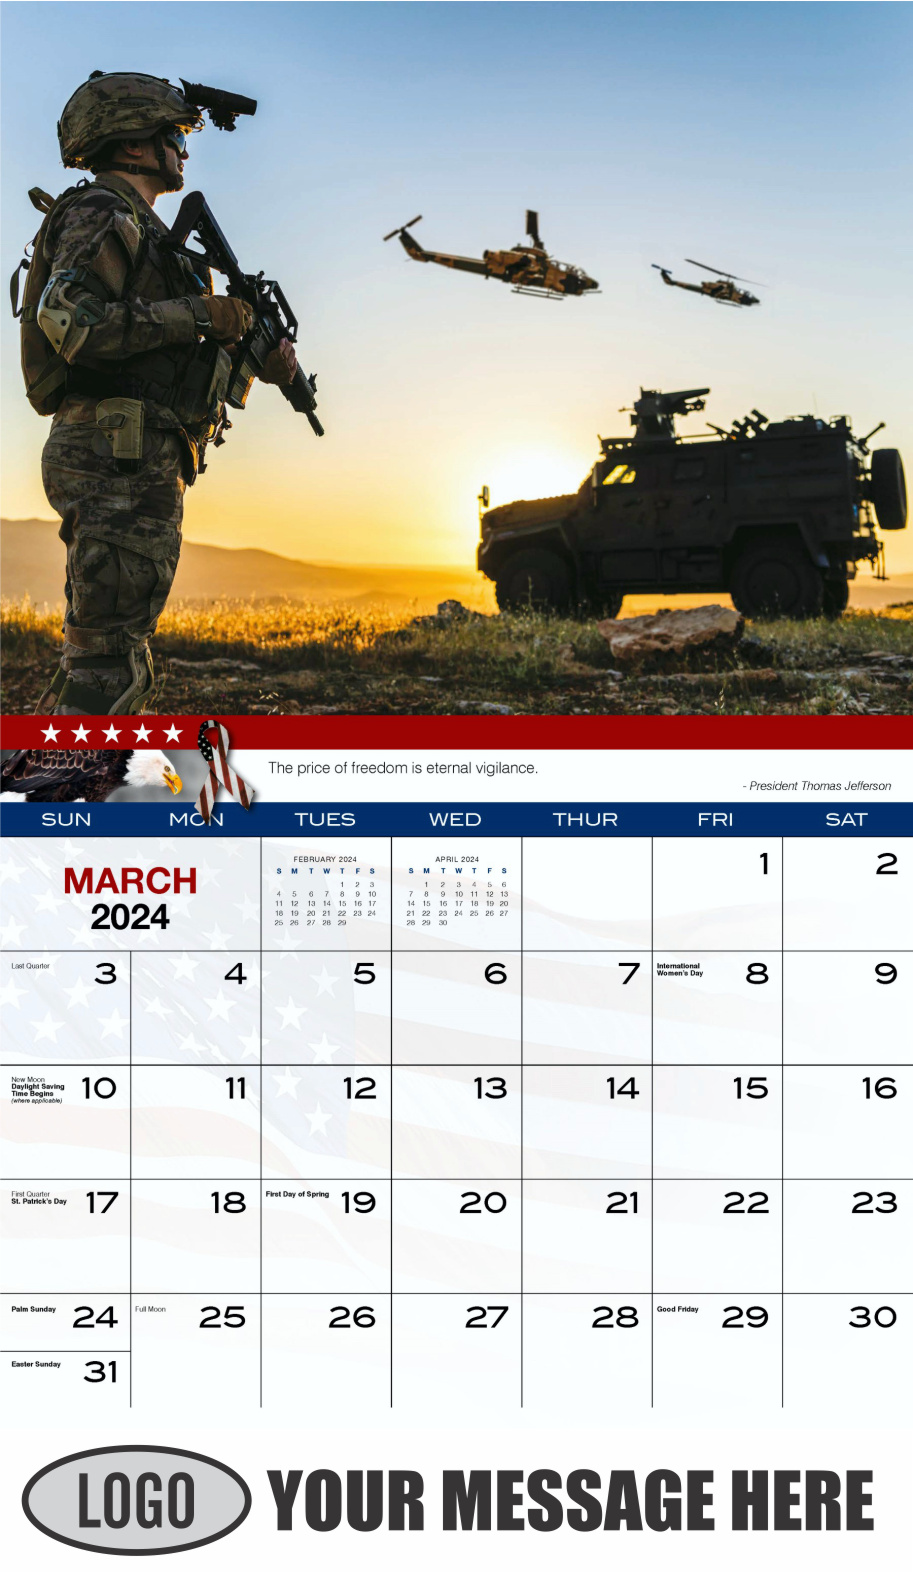 Home of the Brave 2024 USA Armed Forces Business Promo Calendar - March